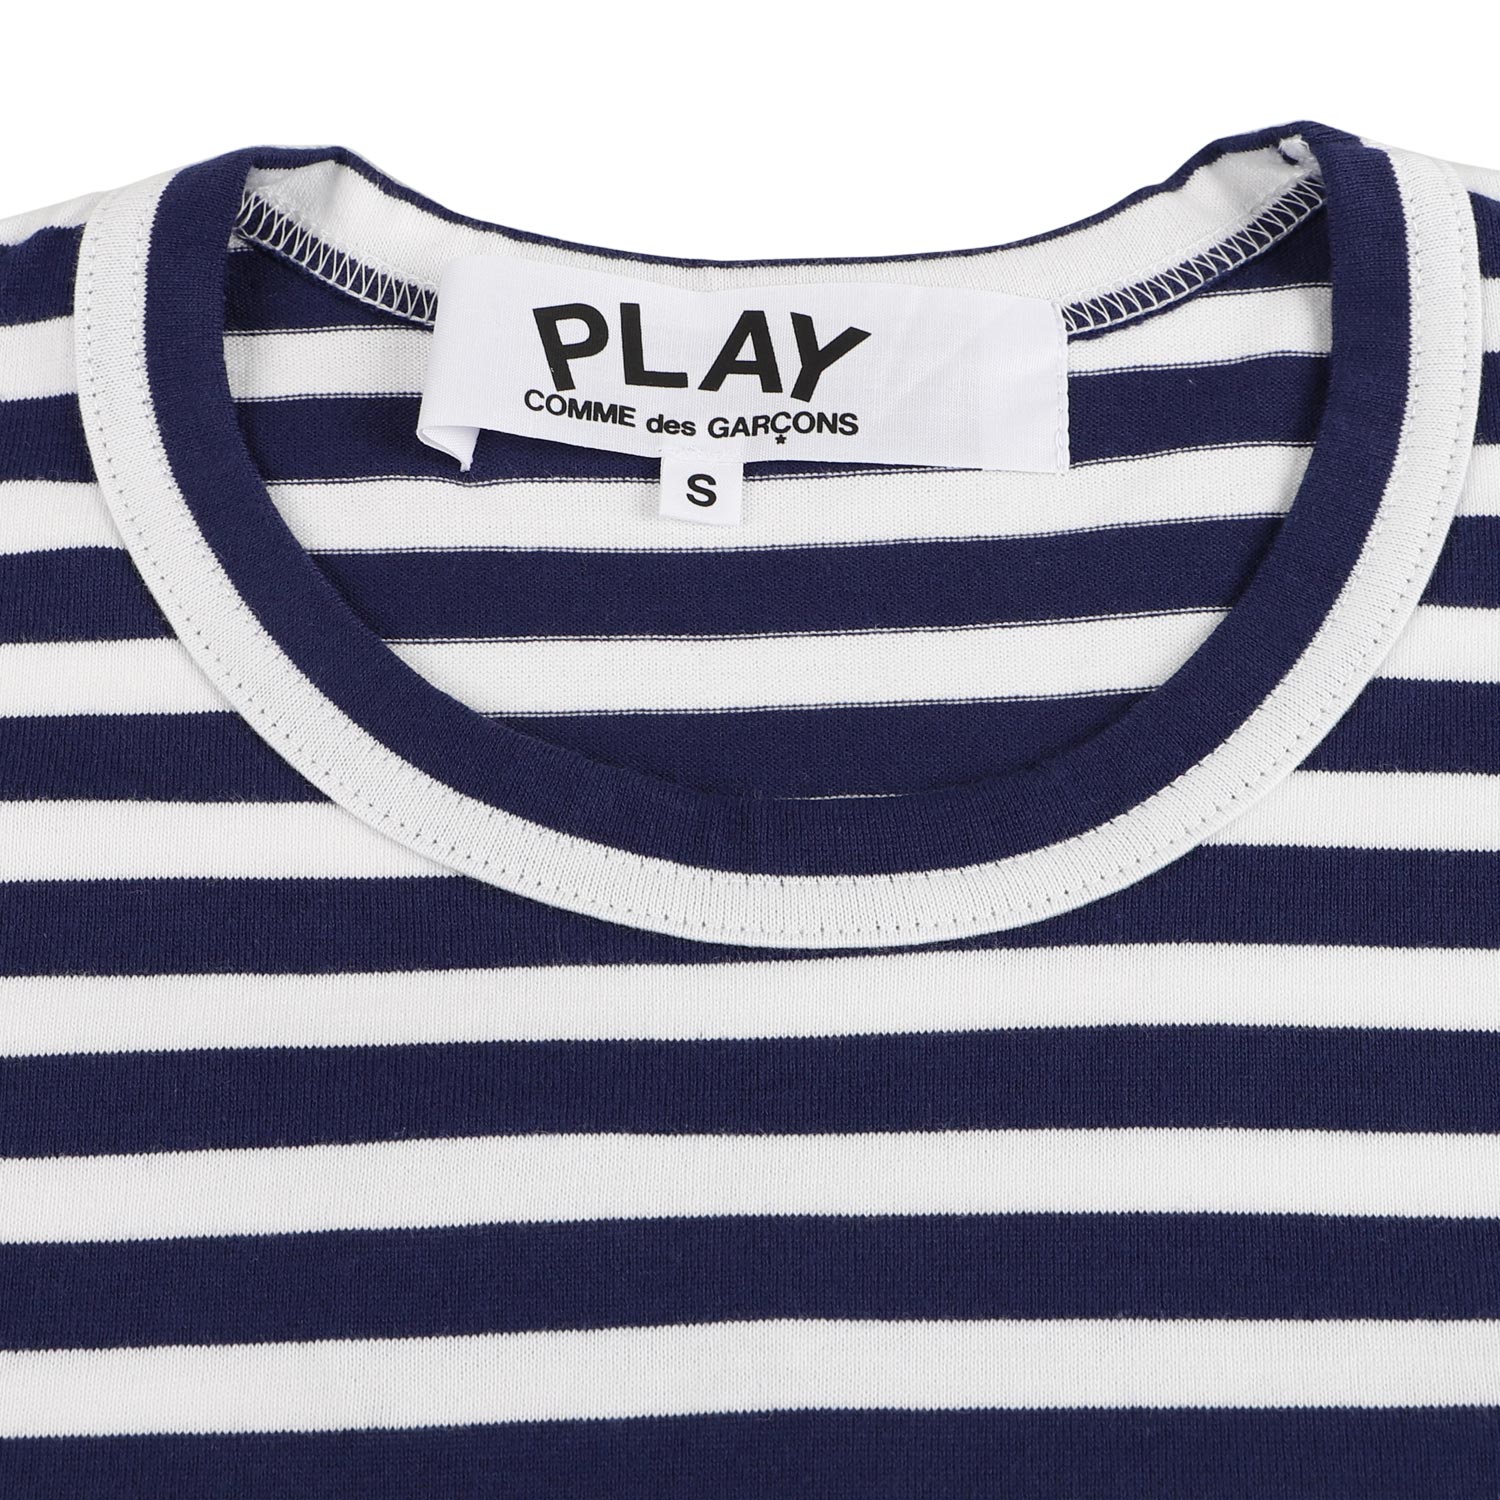 PLAY COMME 長袖 GREEN プレイ コムデギャルソン GARCONS Tシャツ T-SHIRT STRIPED HEART des